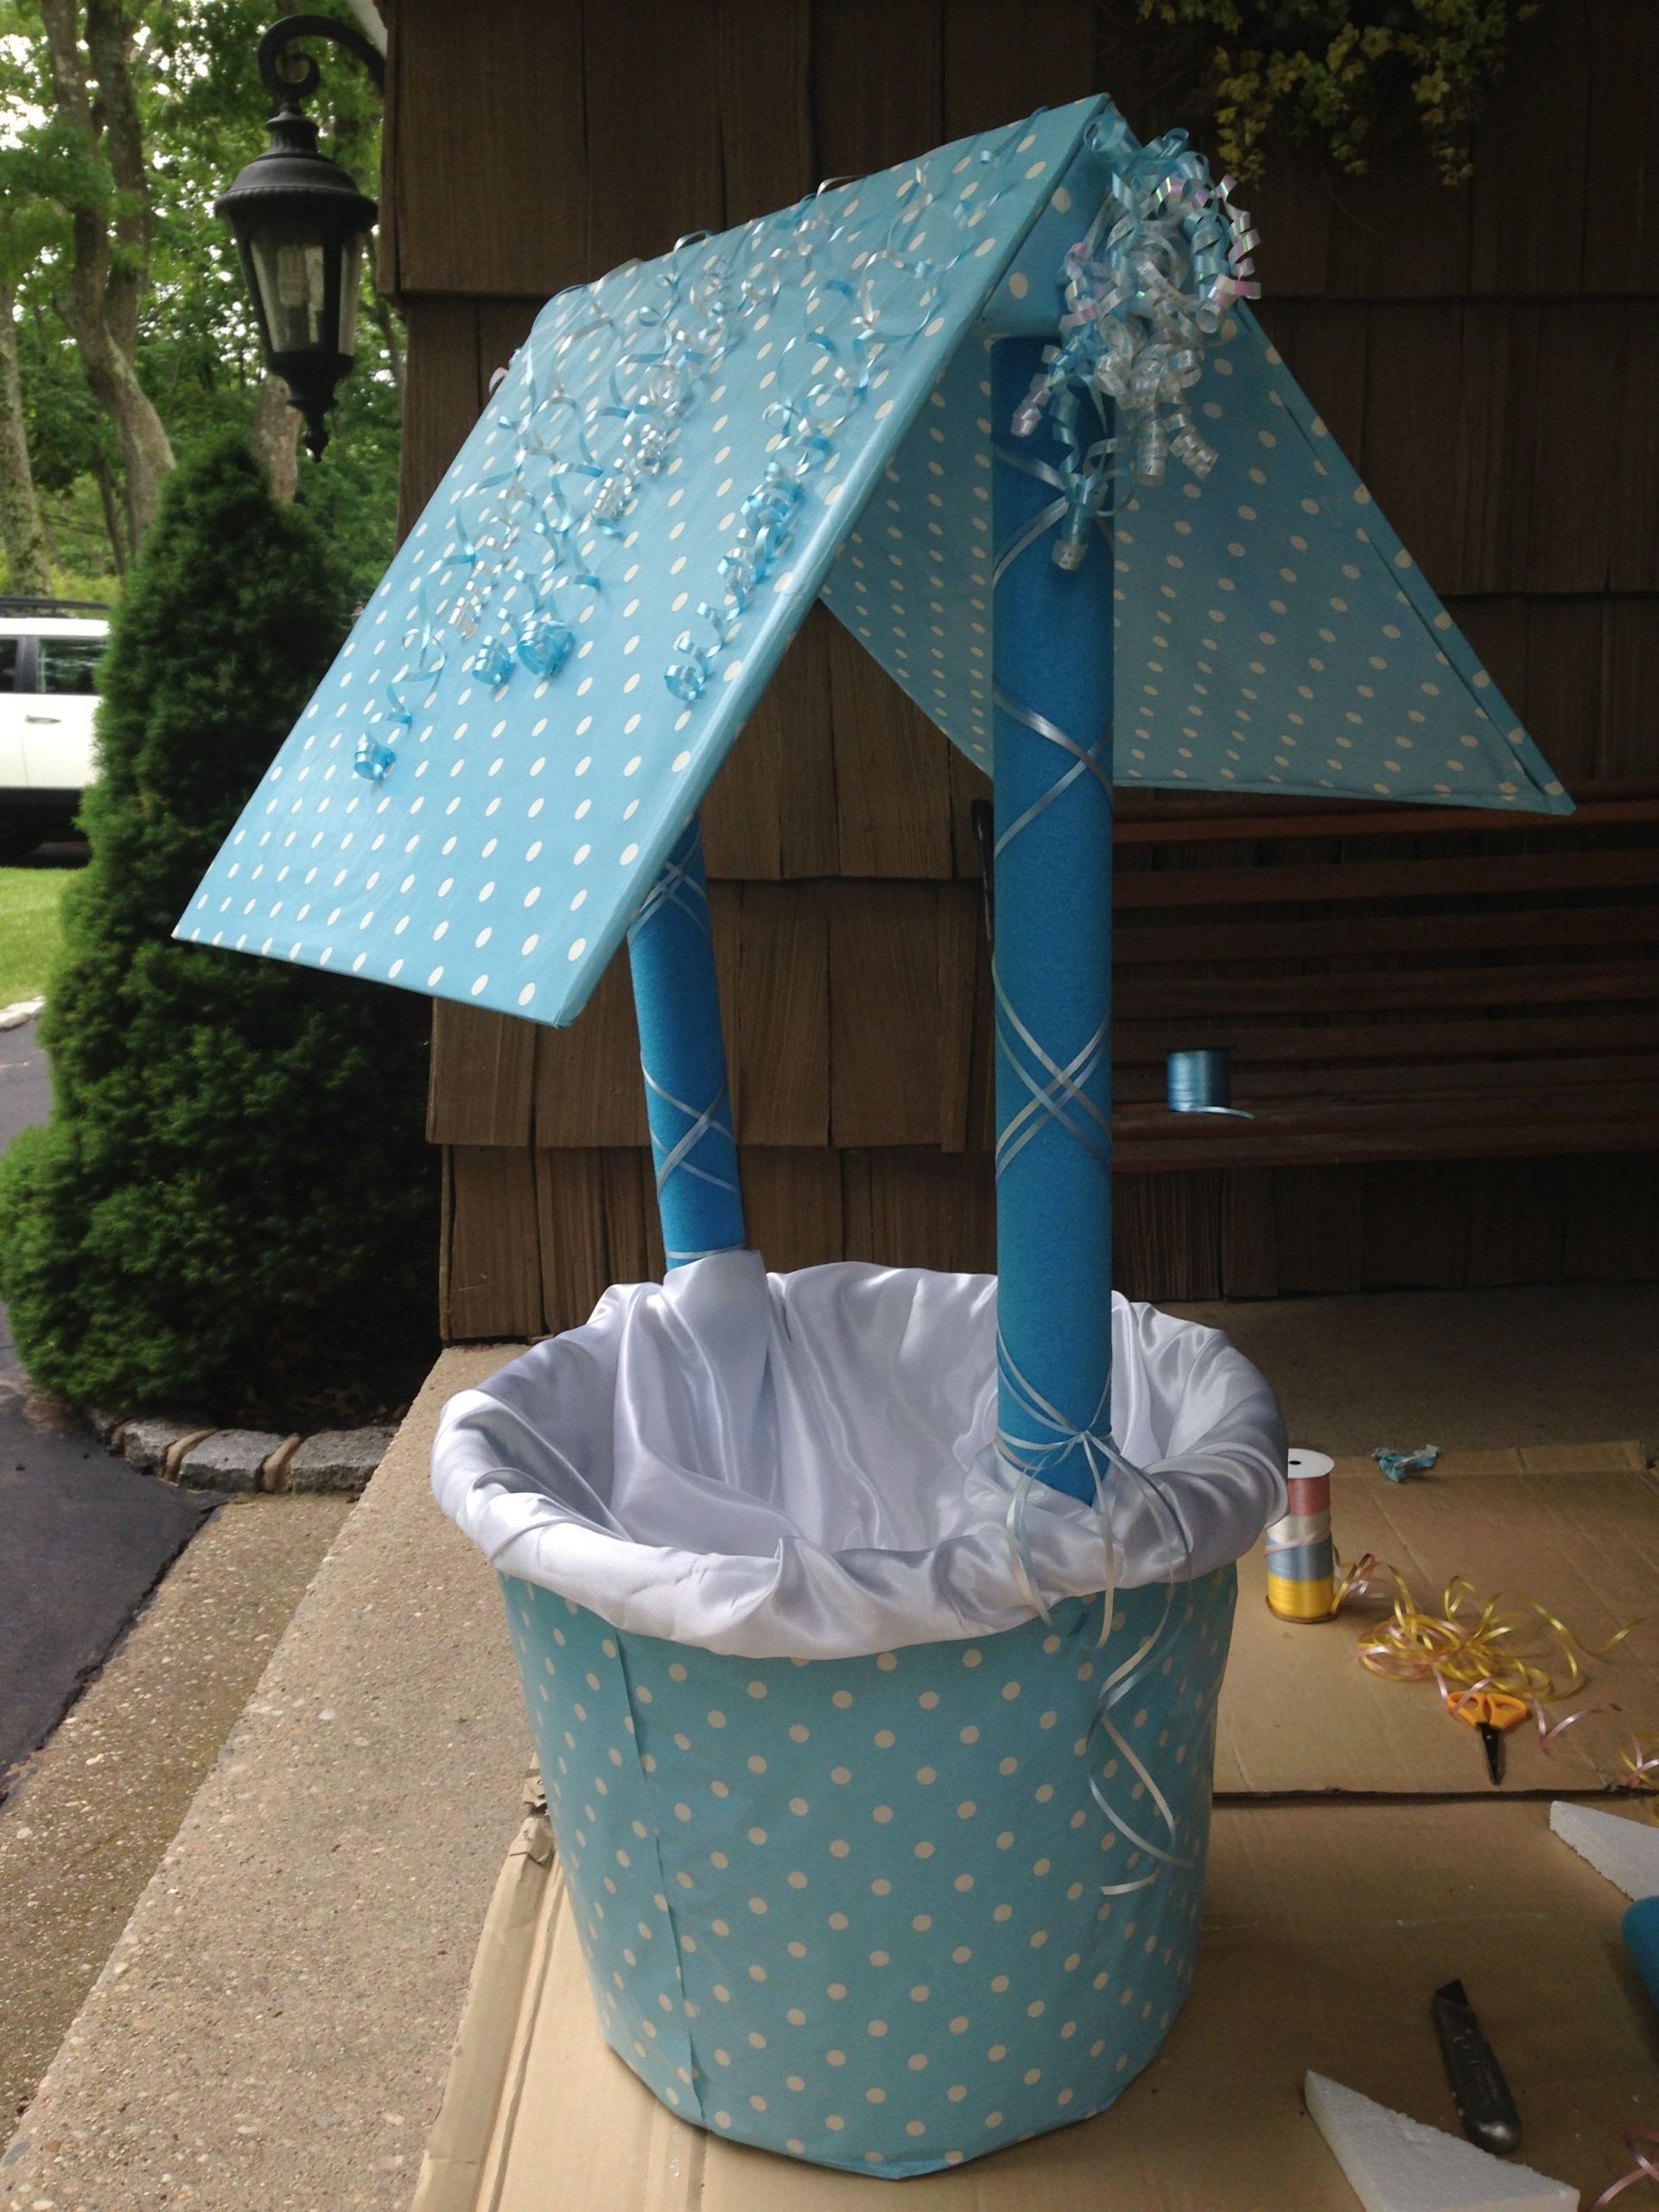 Baby Shower Wishing Well Gift Ideas
 GOOD IDEA TO USE A BASKET OR A LARGE FLOWER POT FOR THE